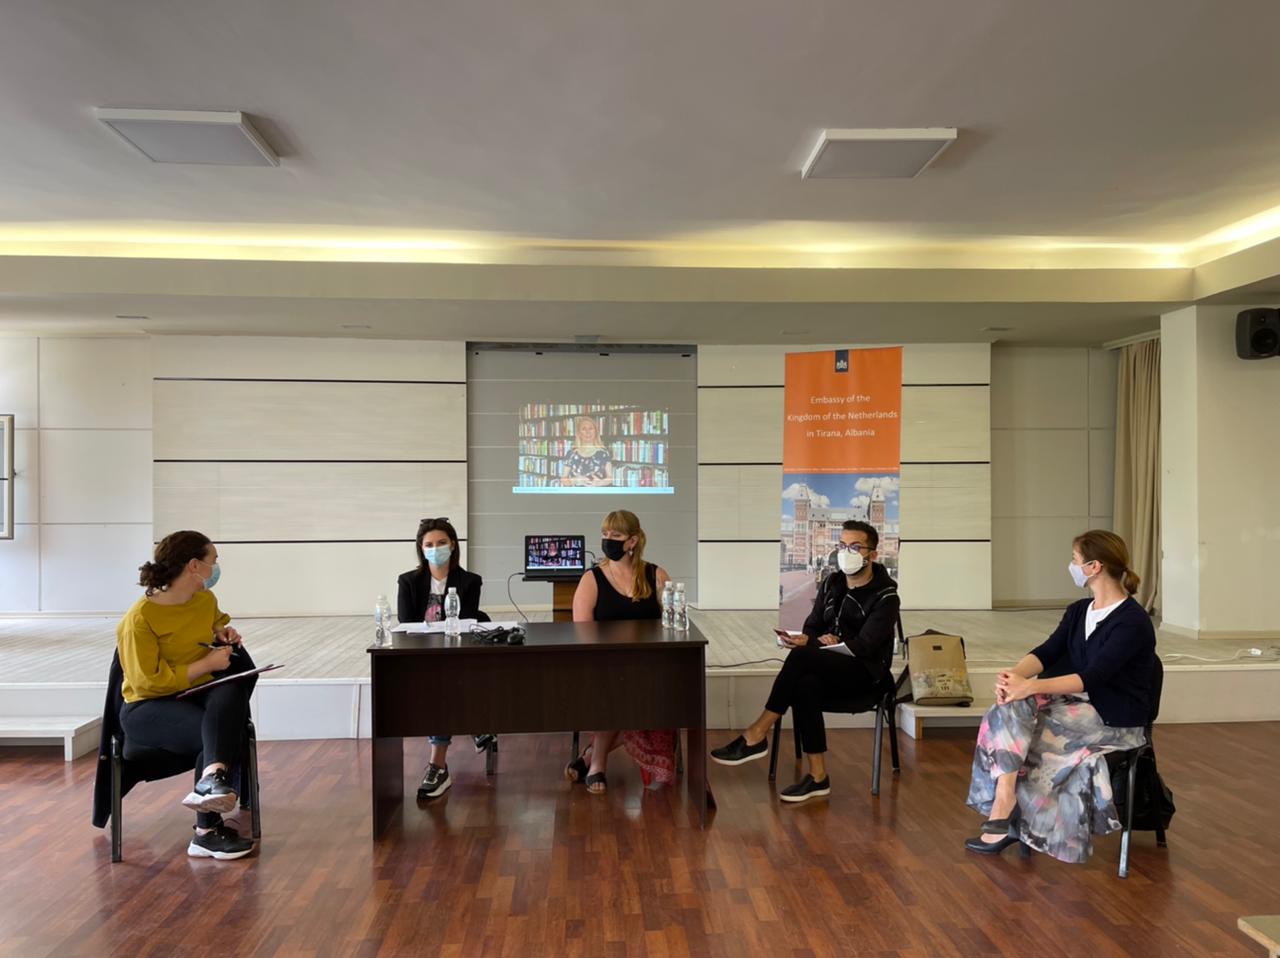 NGO Open Mind Spectrum Albania Holds Debates on LGBTI Rights in Three Albanian Cities